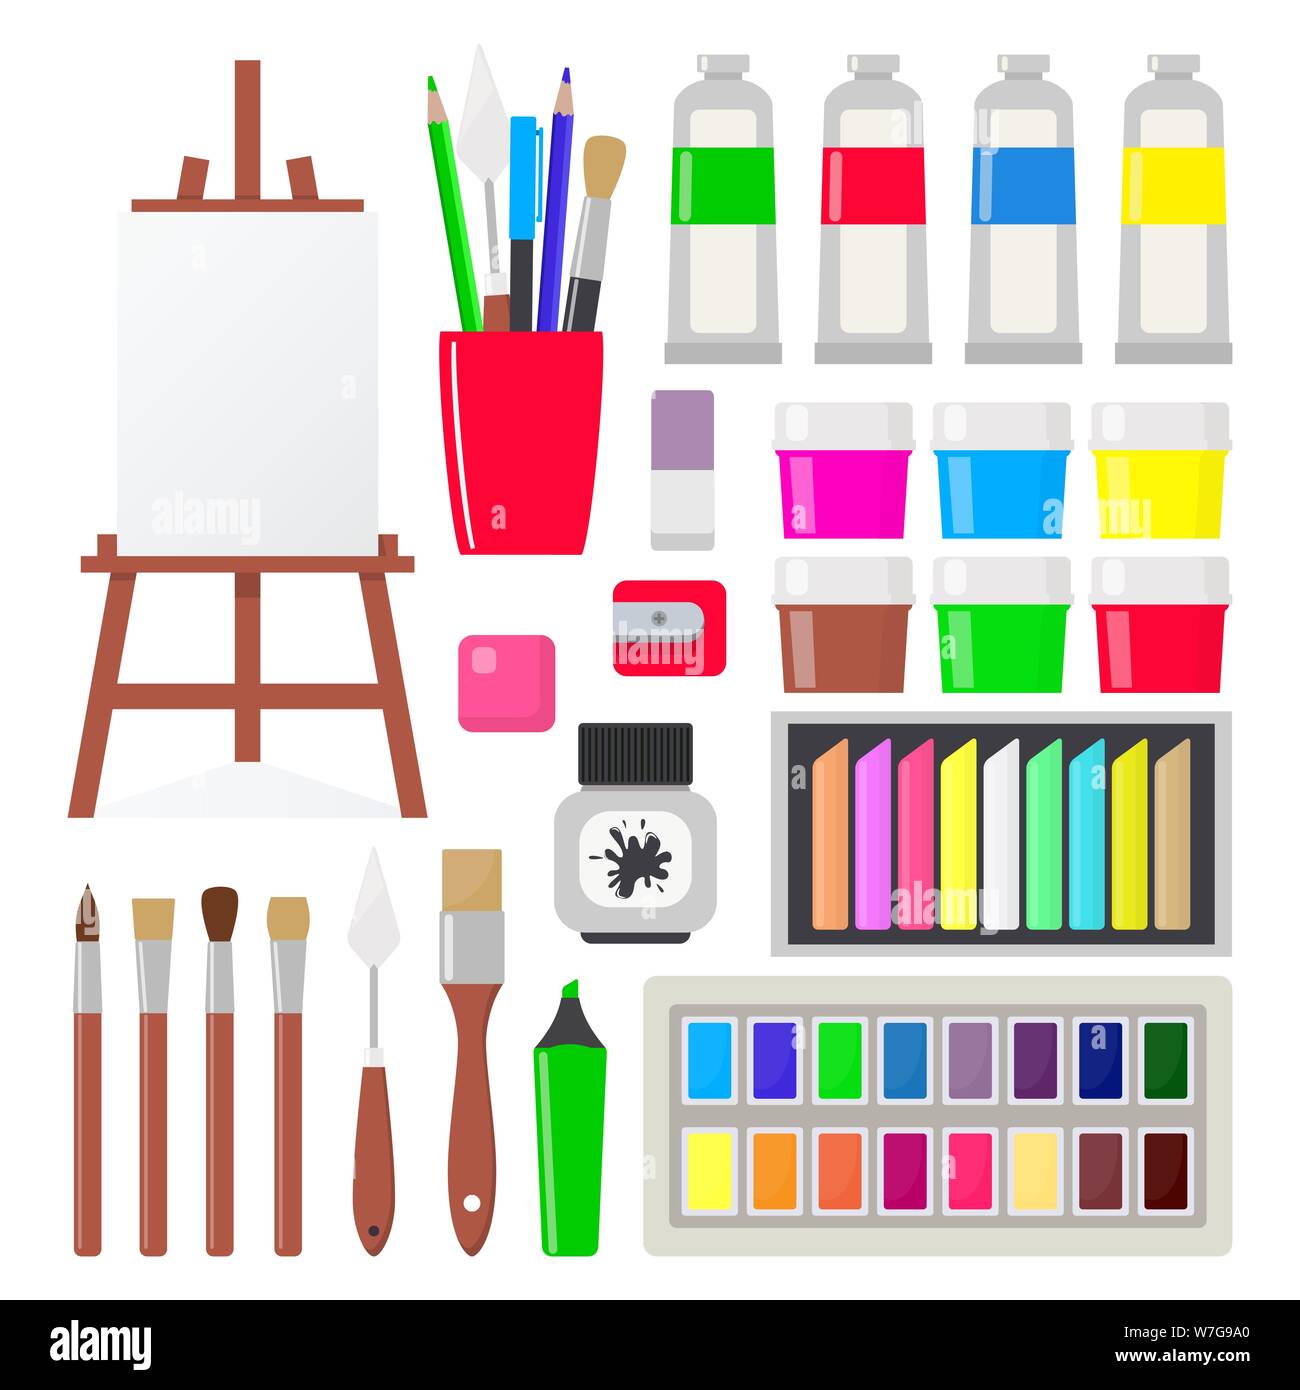 Painting tools elements in flat style, set. Art supplies: easel with canvas, paint tubes, brushes, pencil, gouache, watercolor, oil paints crayons pas Stock Vector